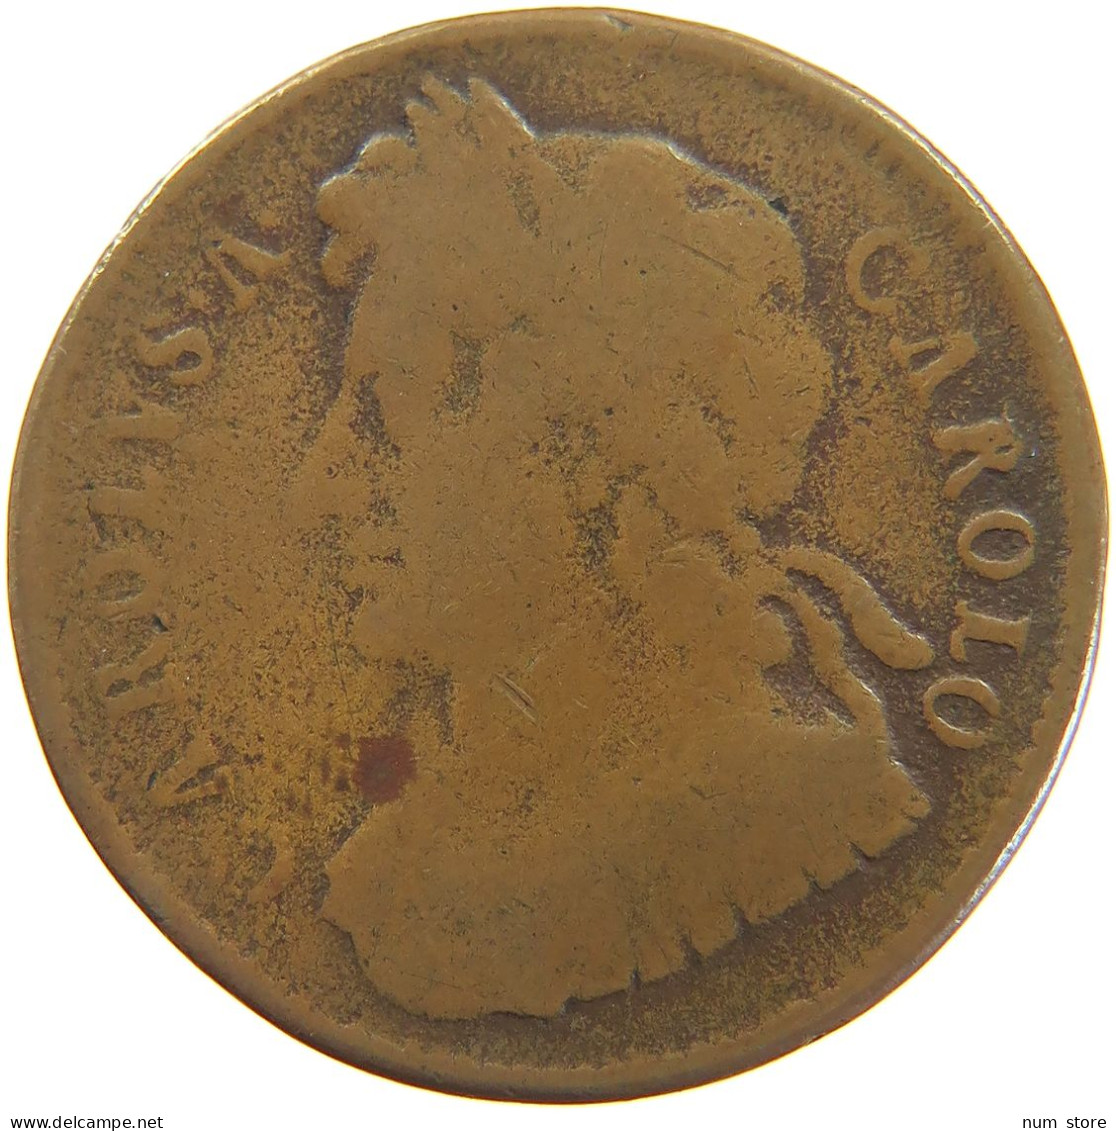 GREAT BRITAIN HALFPENNY 1/2 PENNY 1675 Charles II (1660-1685) #t021 0091 - B. 1/2 Penny